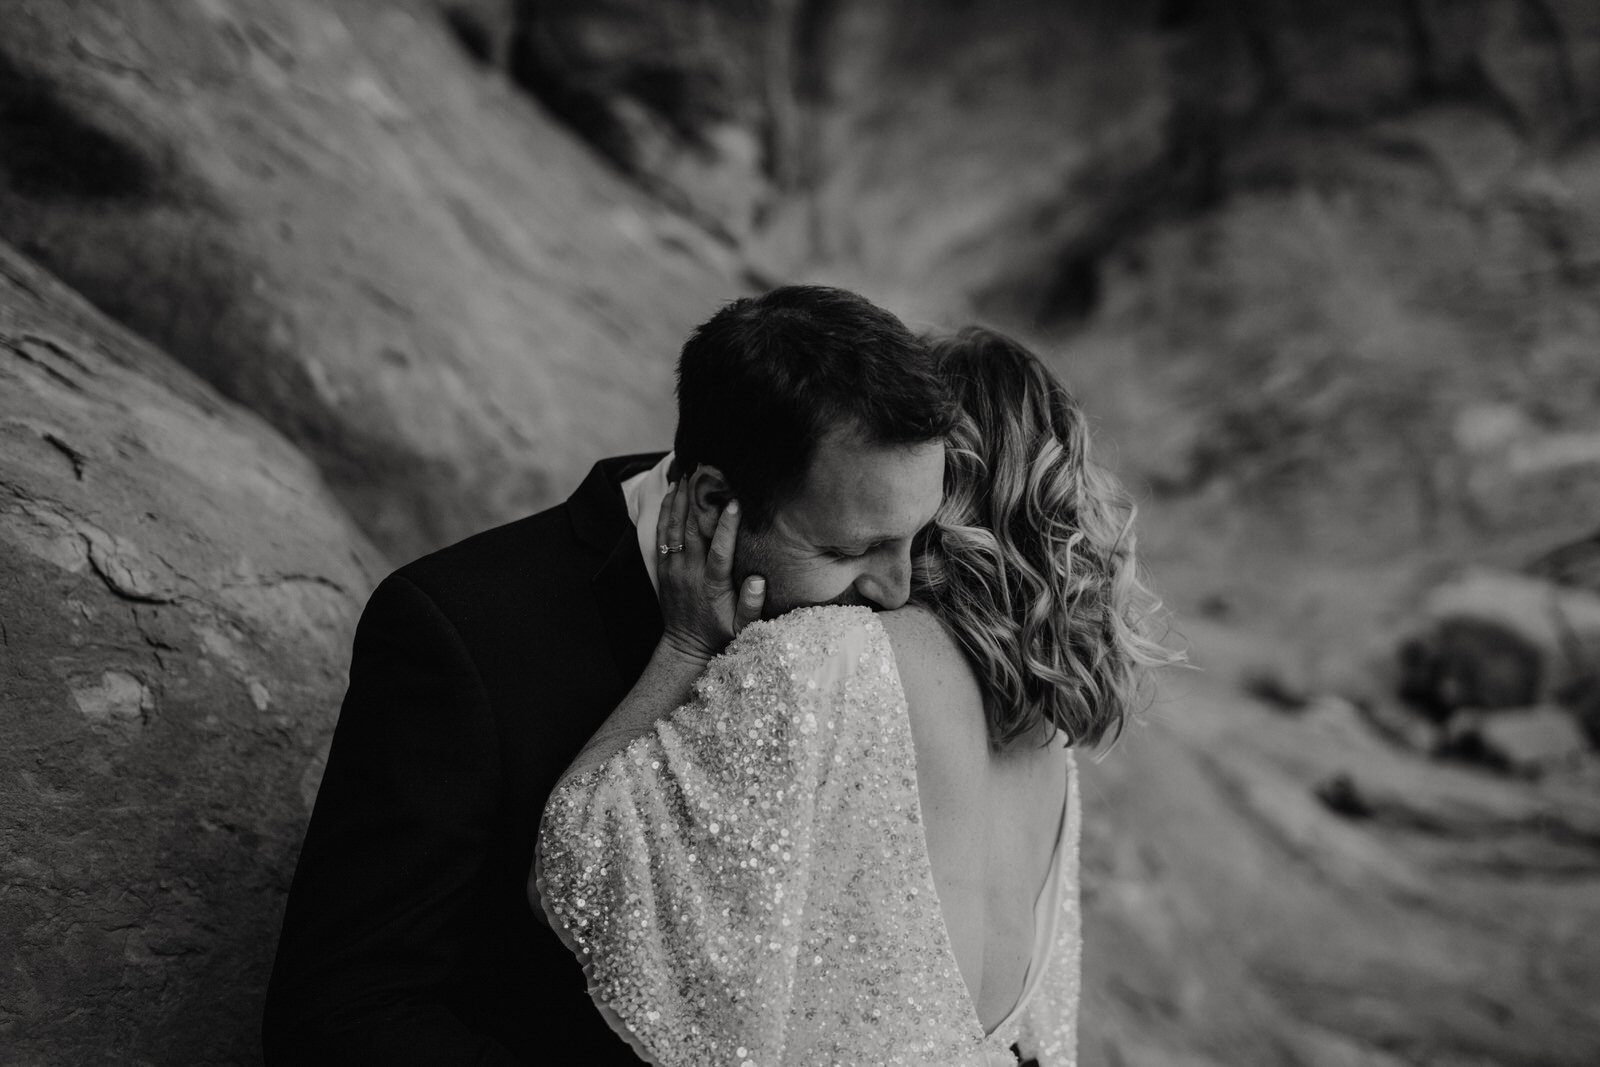 Arches-National-Park-Wedding-groom-romantically-kissing-bride-at-double-arches (3).jpg